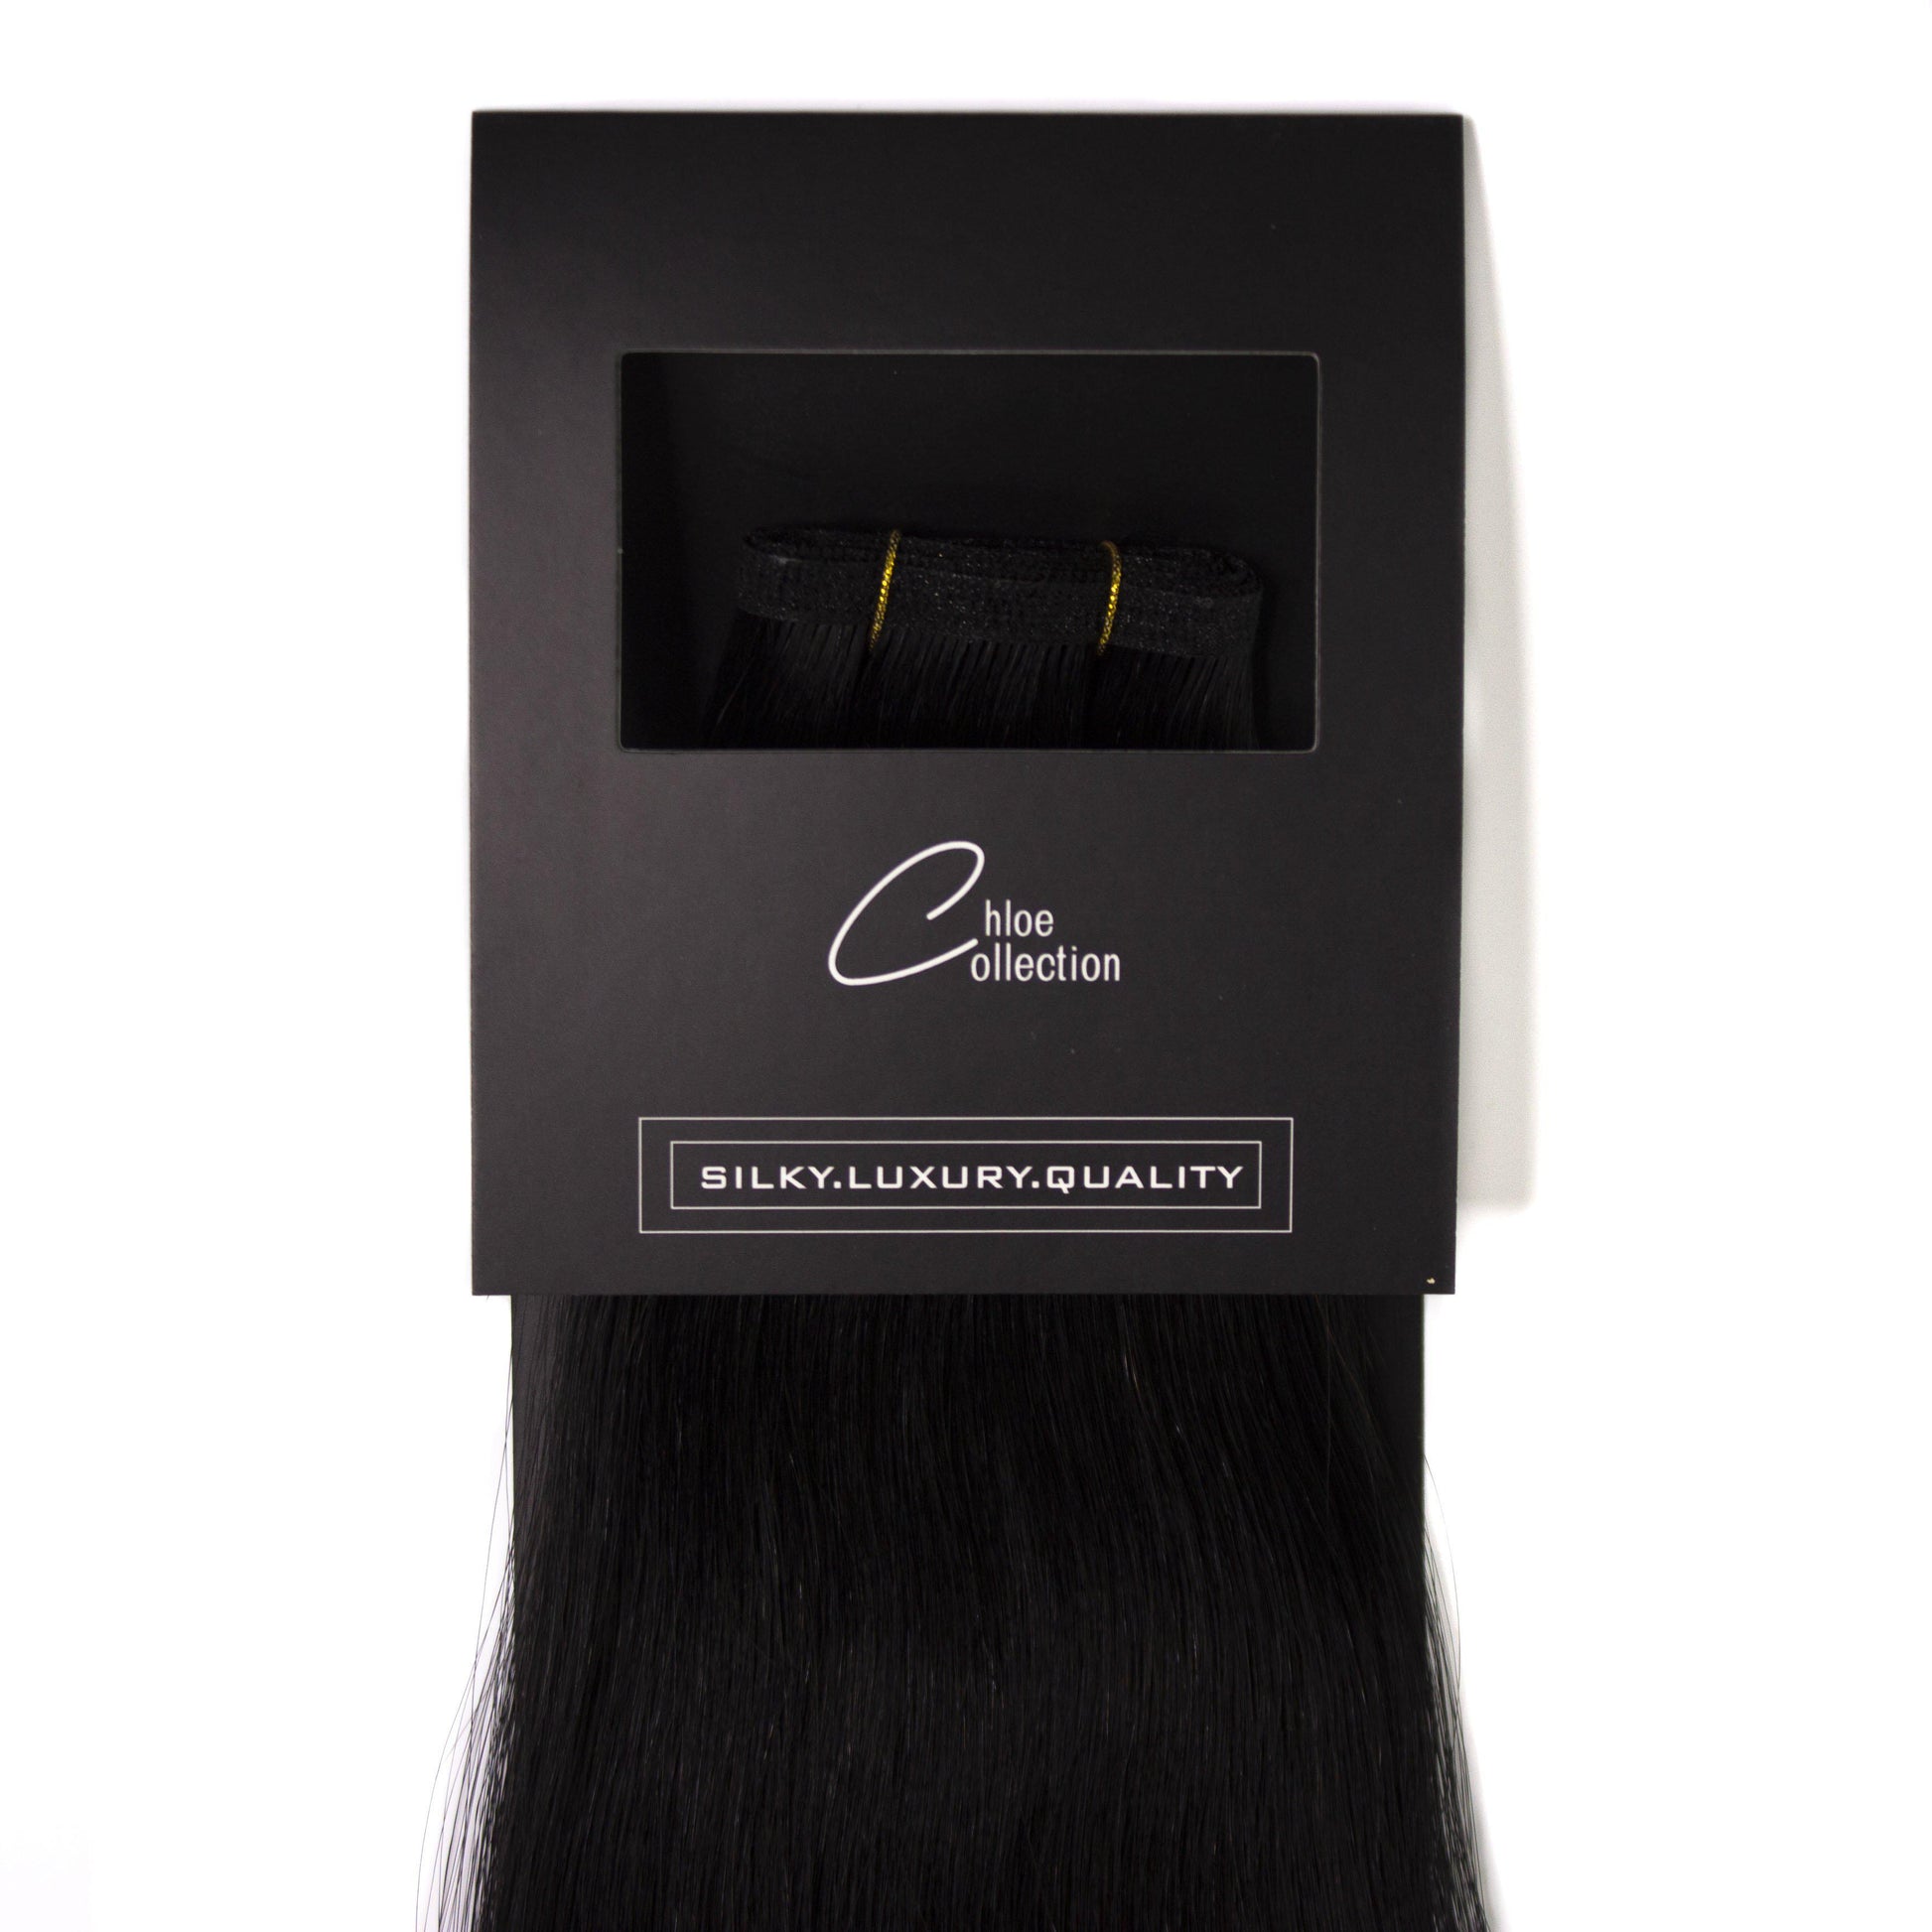 Chloe Collection - Thin weft 14" #1 - 60g.